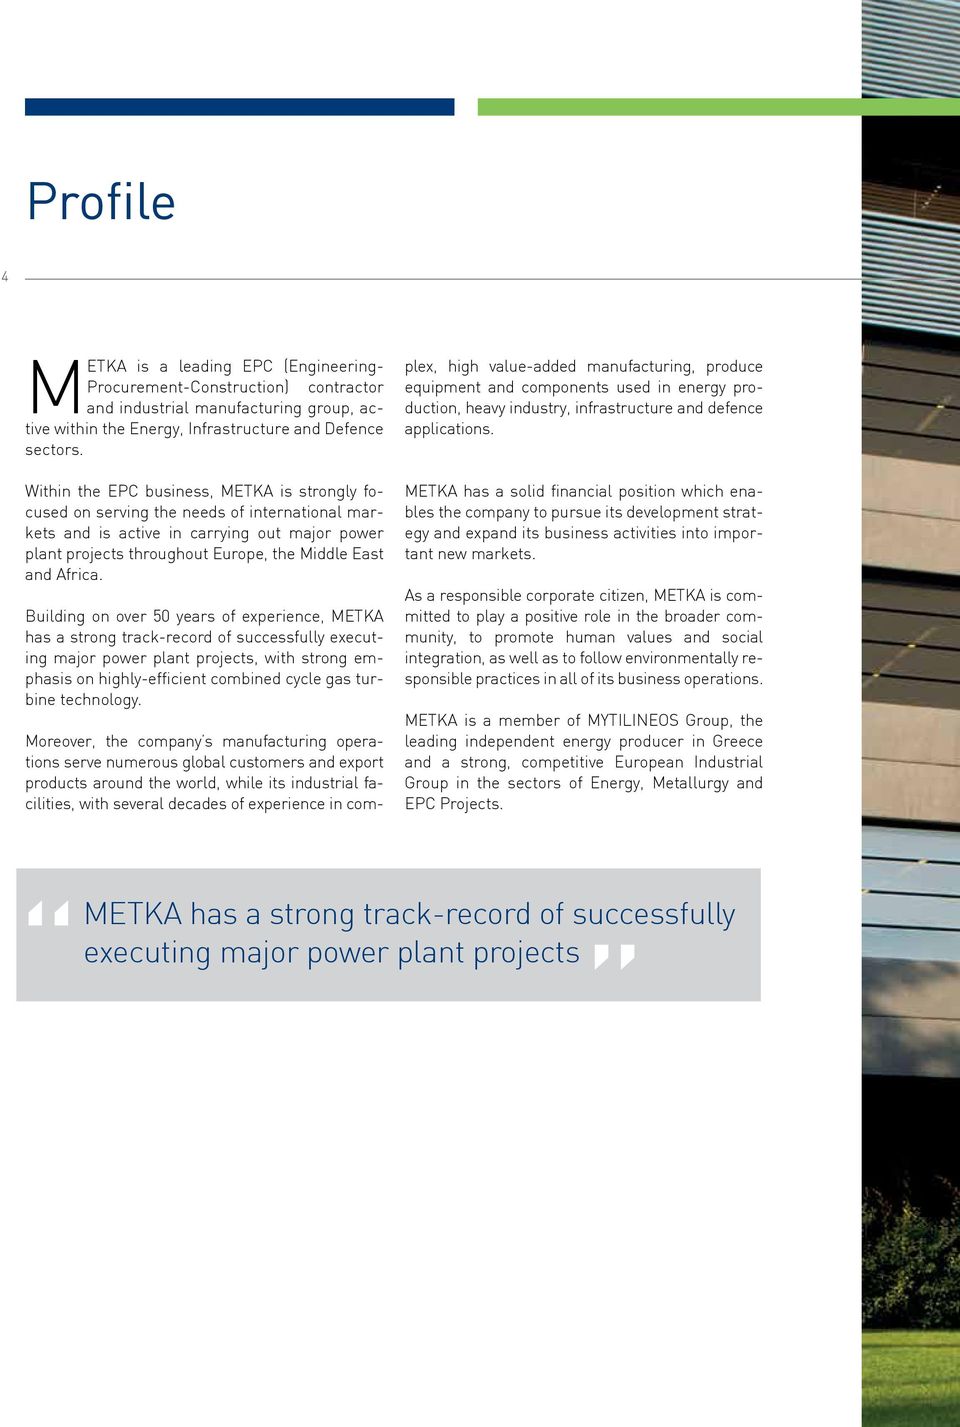 Building on over 50 years of experience, METKA has a strong track-record of successfully executing major power plant projects, with strong emphasis on highly-efficient combined cycle gas turbine